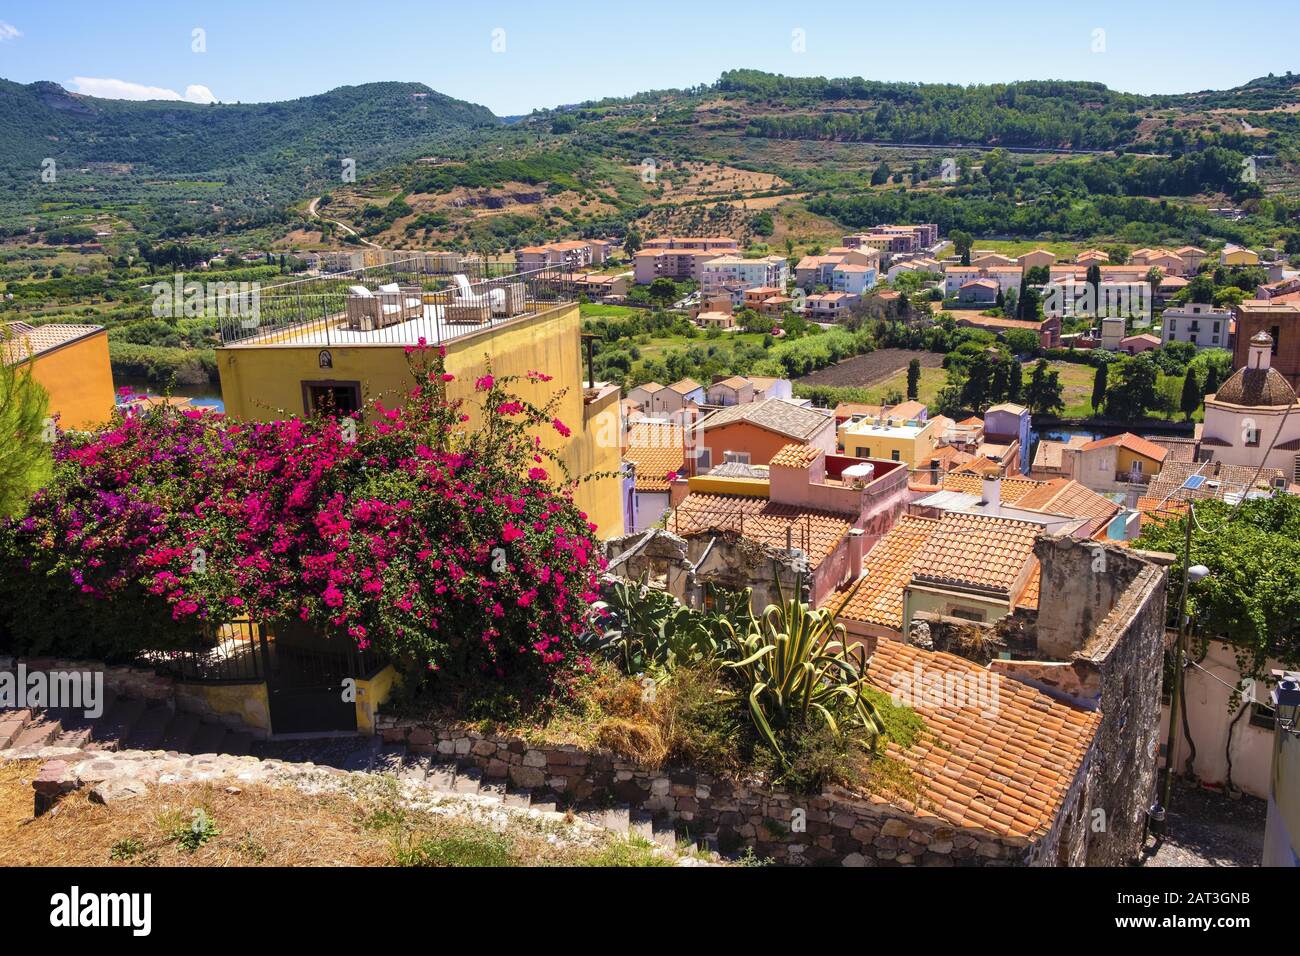 Bosa, Sardinia / Italy - 2018/08/13: Panoramic view of the town of Bosa and surrounding hills seen from Malaspina Castle hill - known also as Castle of Serravalle Stock Photo